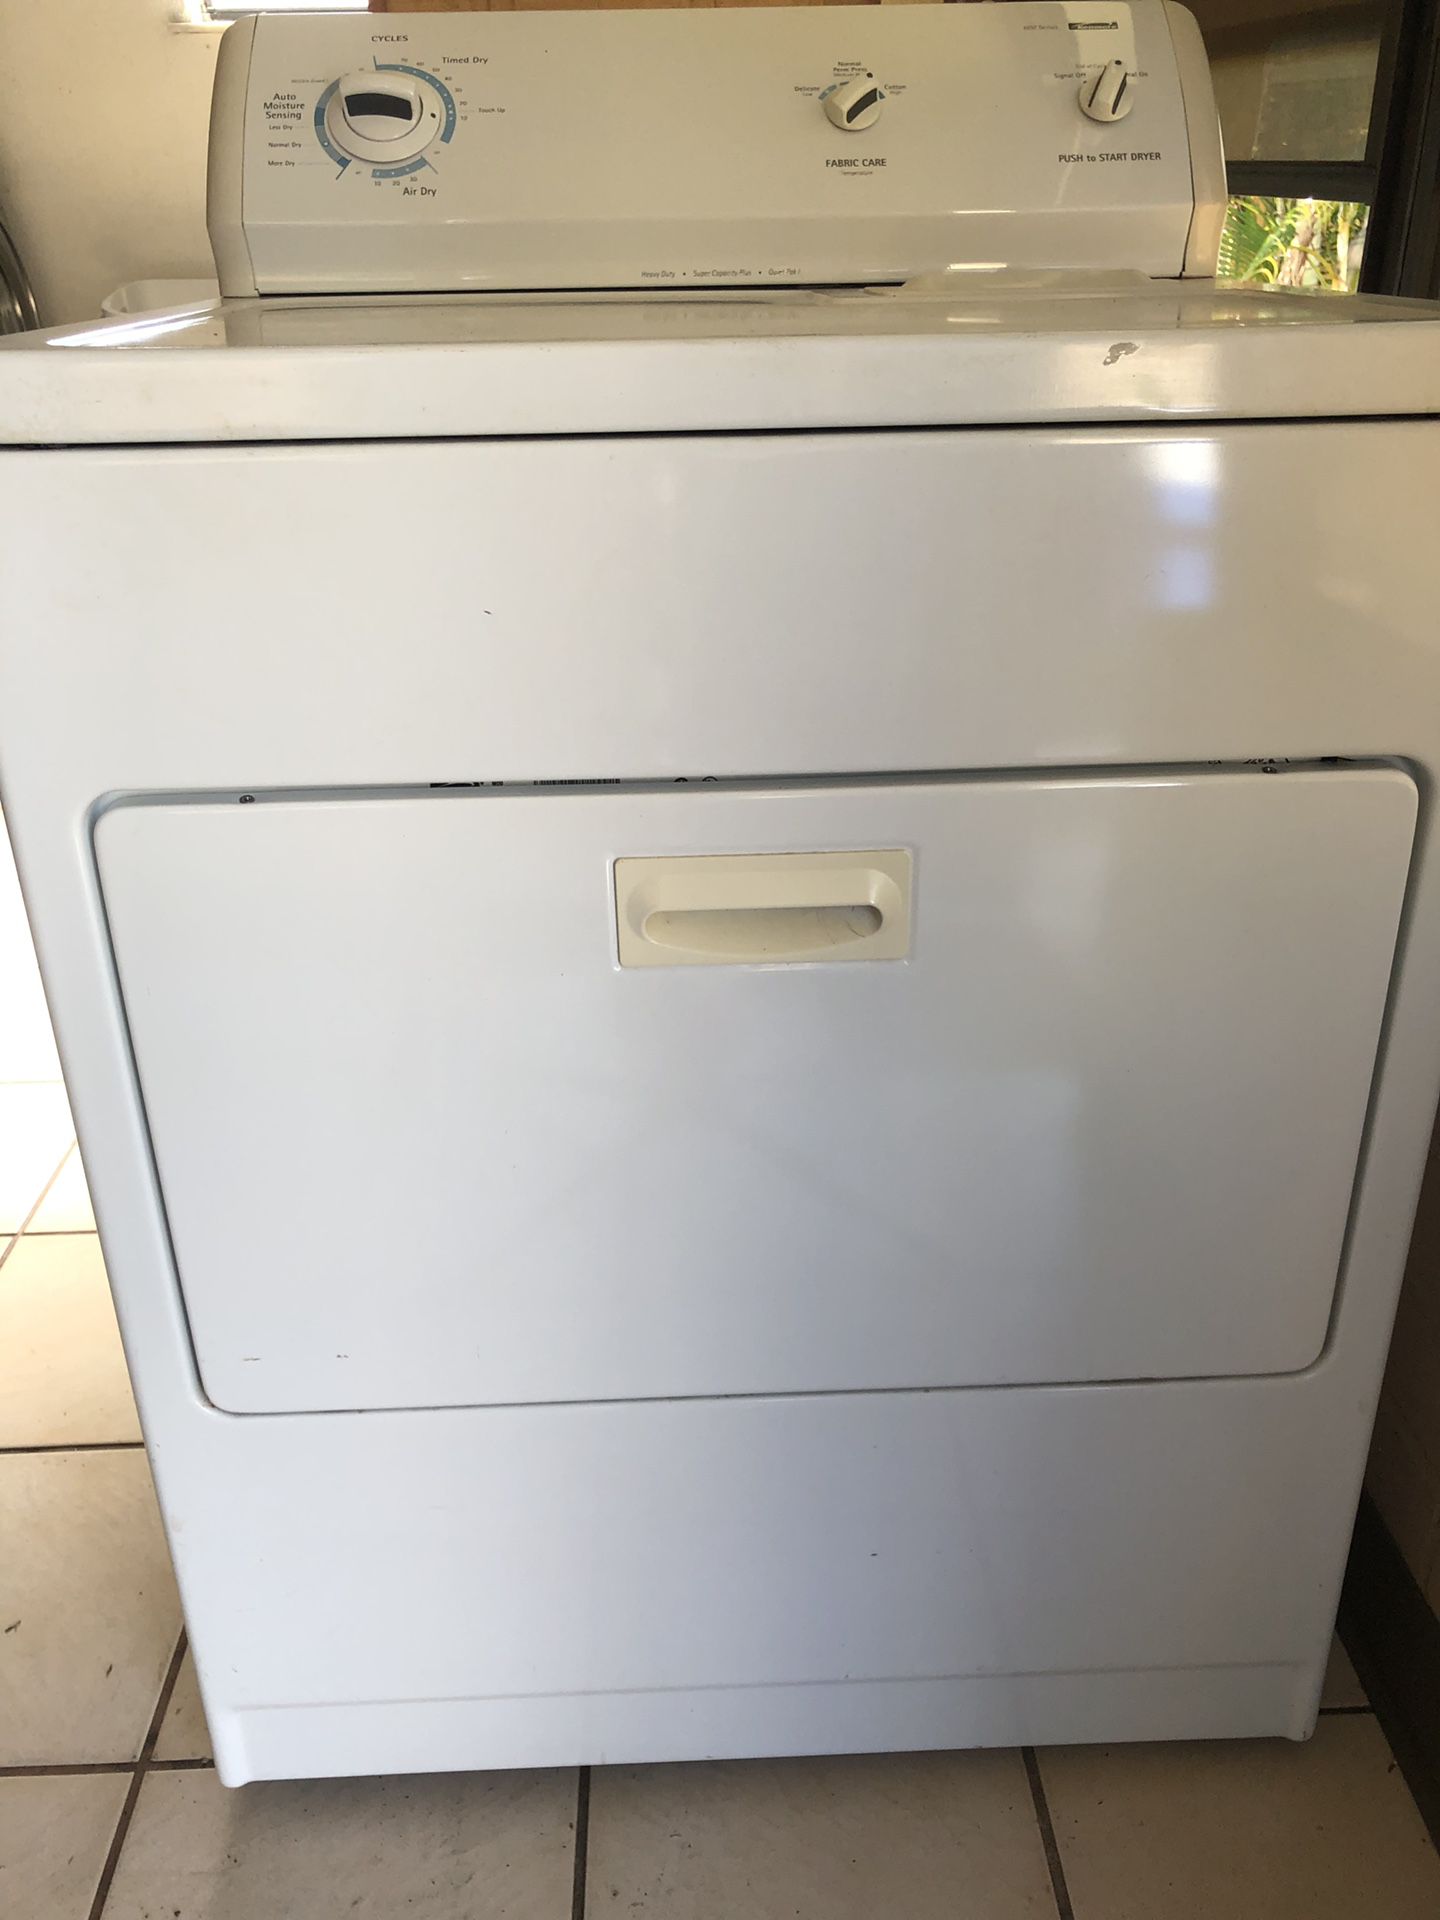 Kenmore 600 series washer and dryer set $110 obo